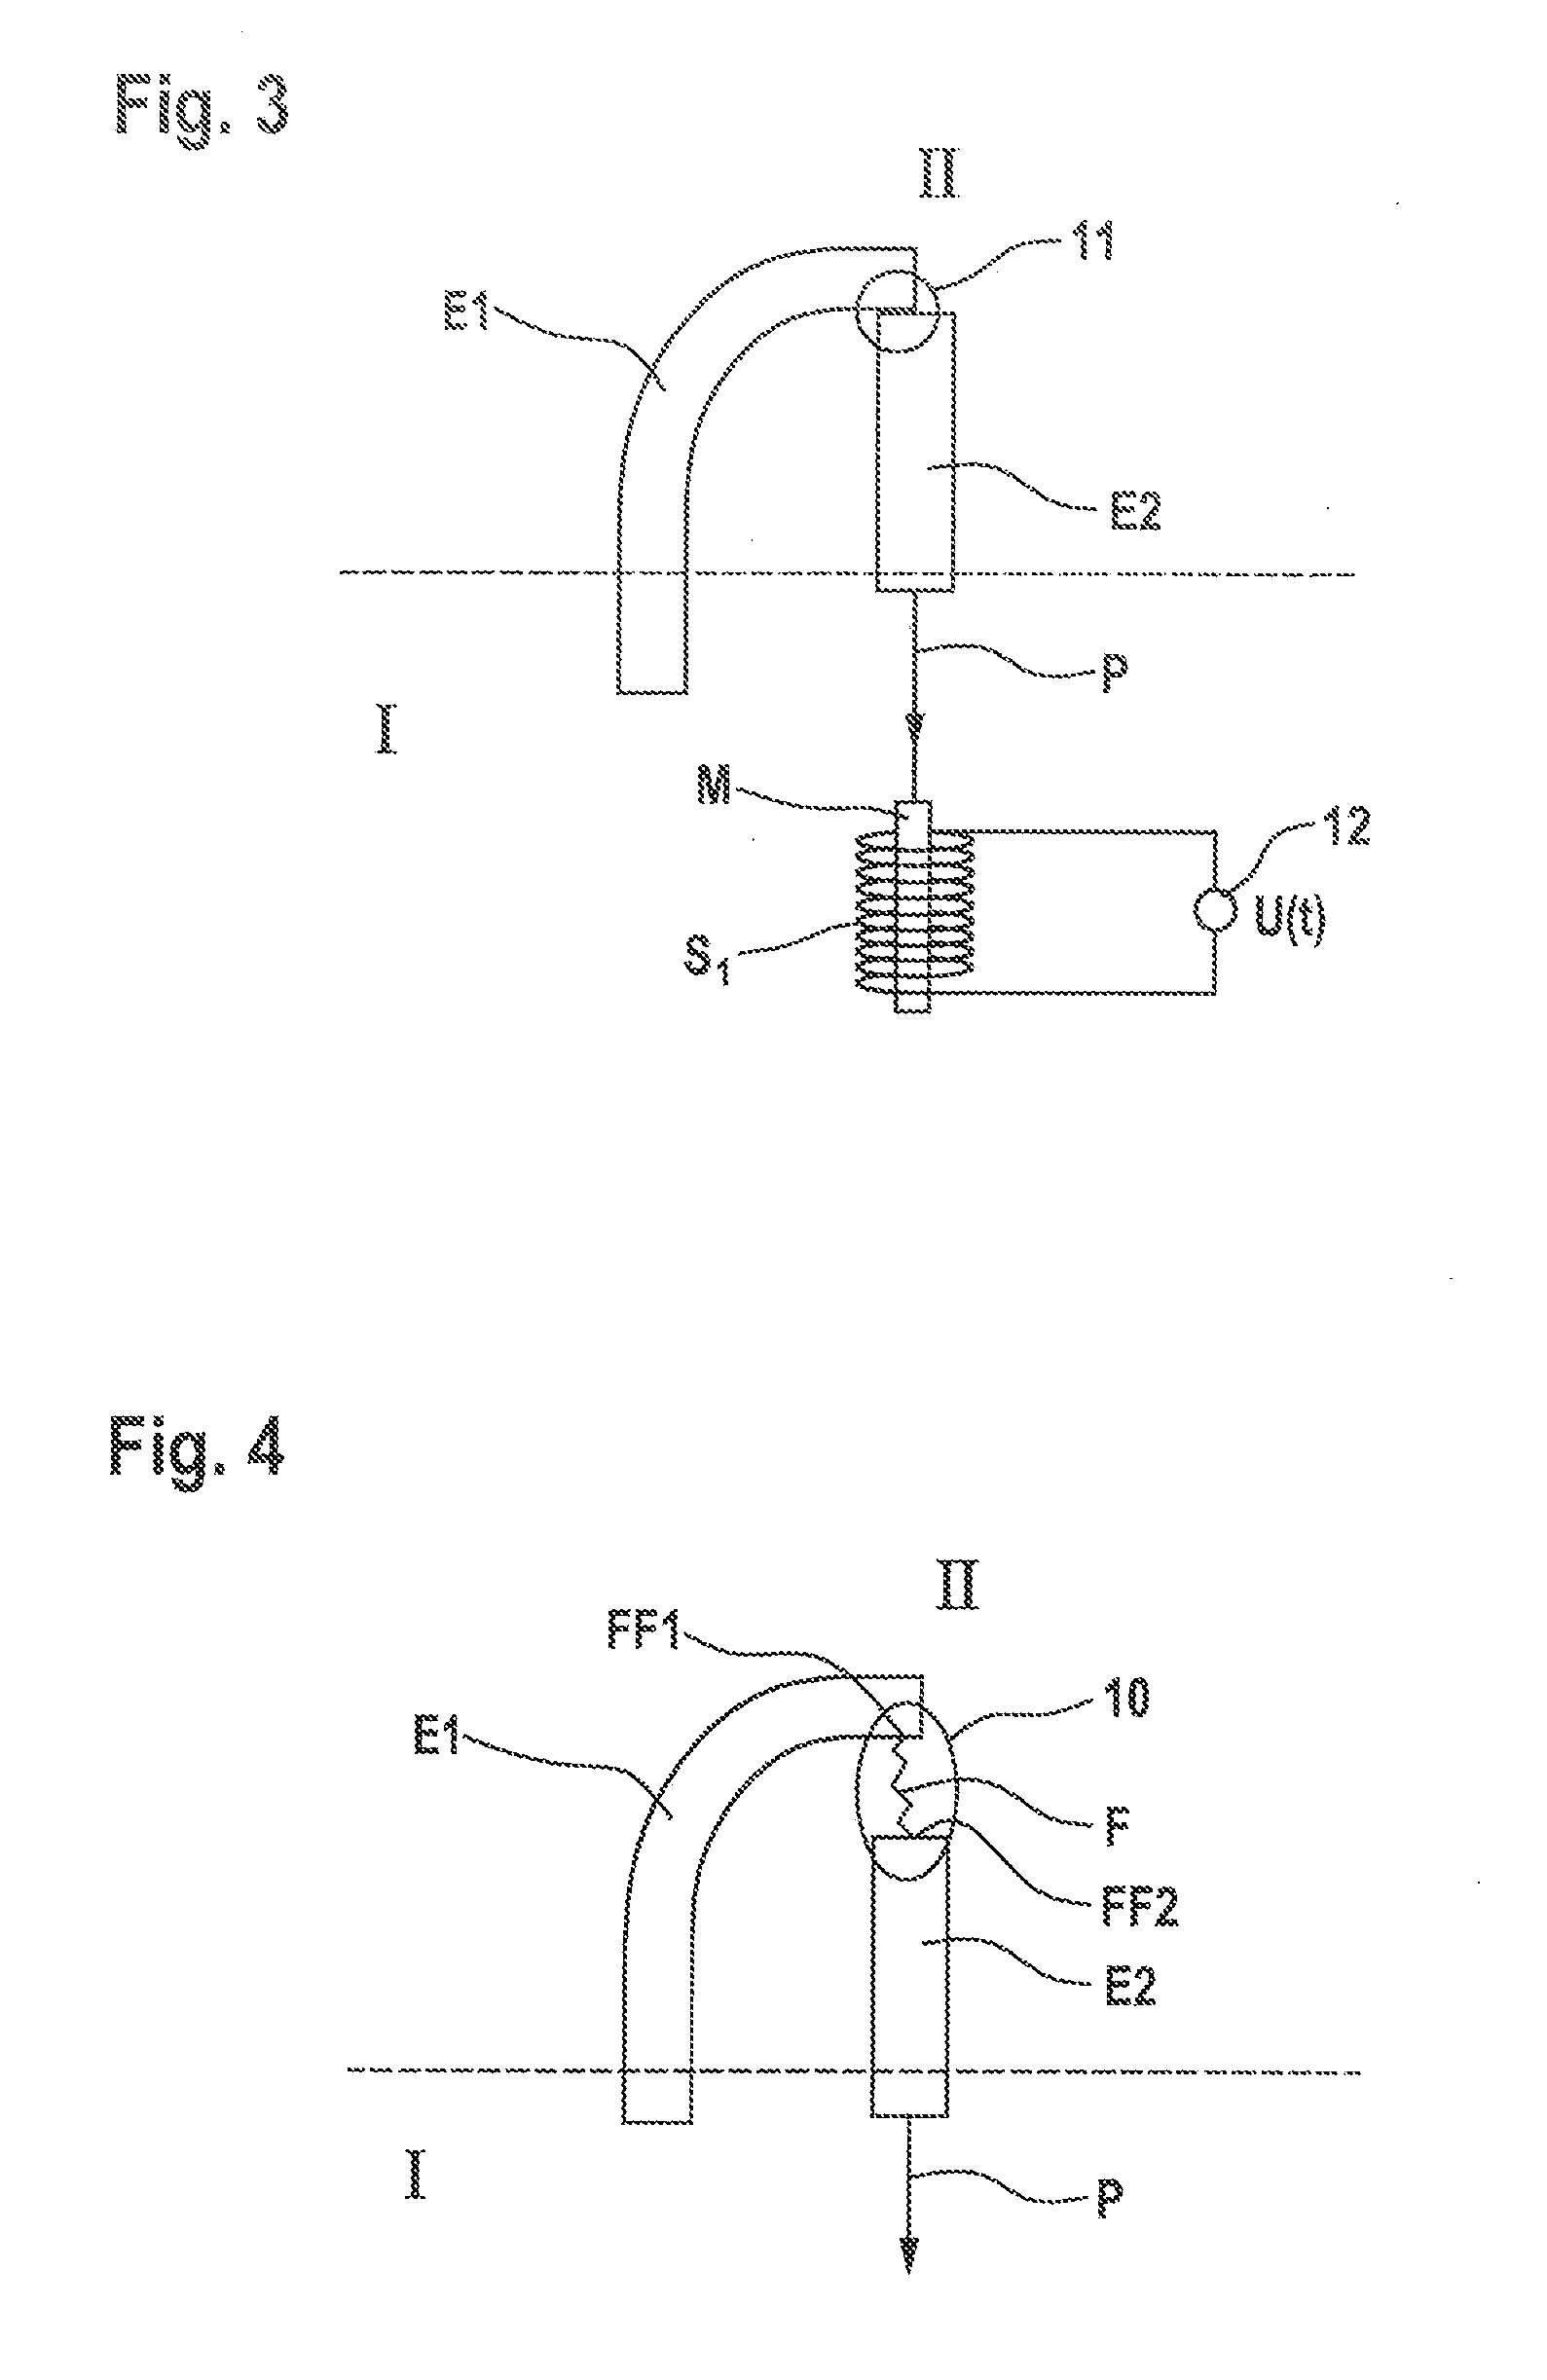 Ignition unit for an internal combustion engine